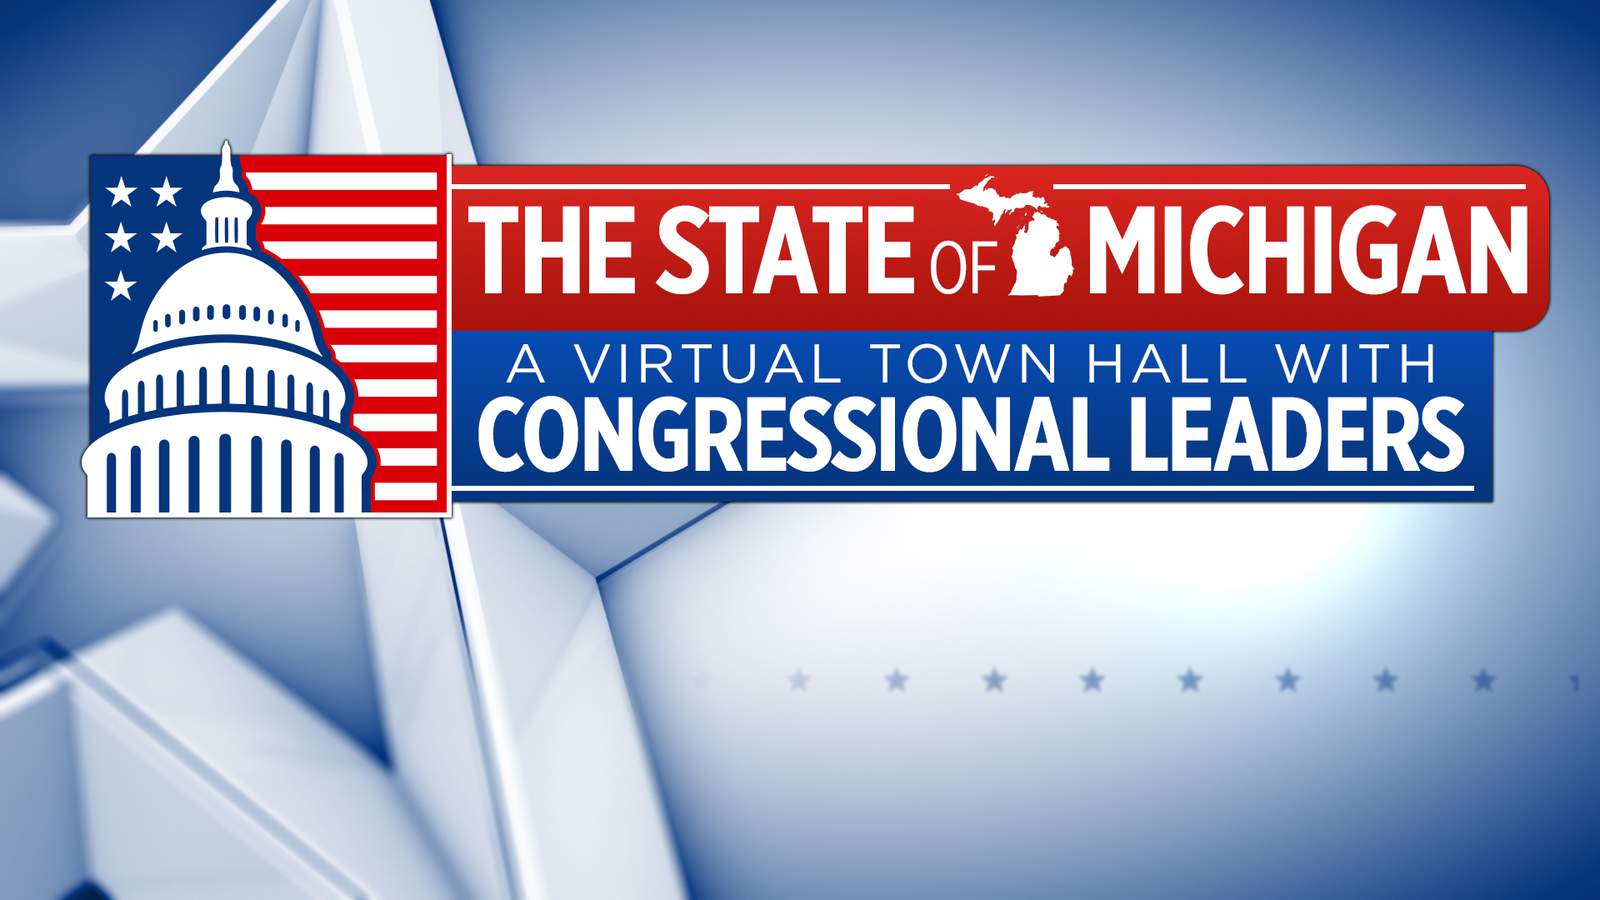 Watch: ‘The State of Michigan’ virtual town hall with congressional leaders